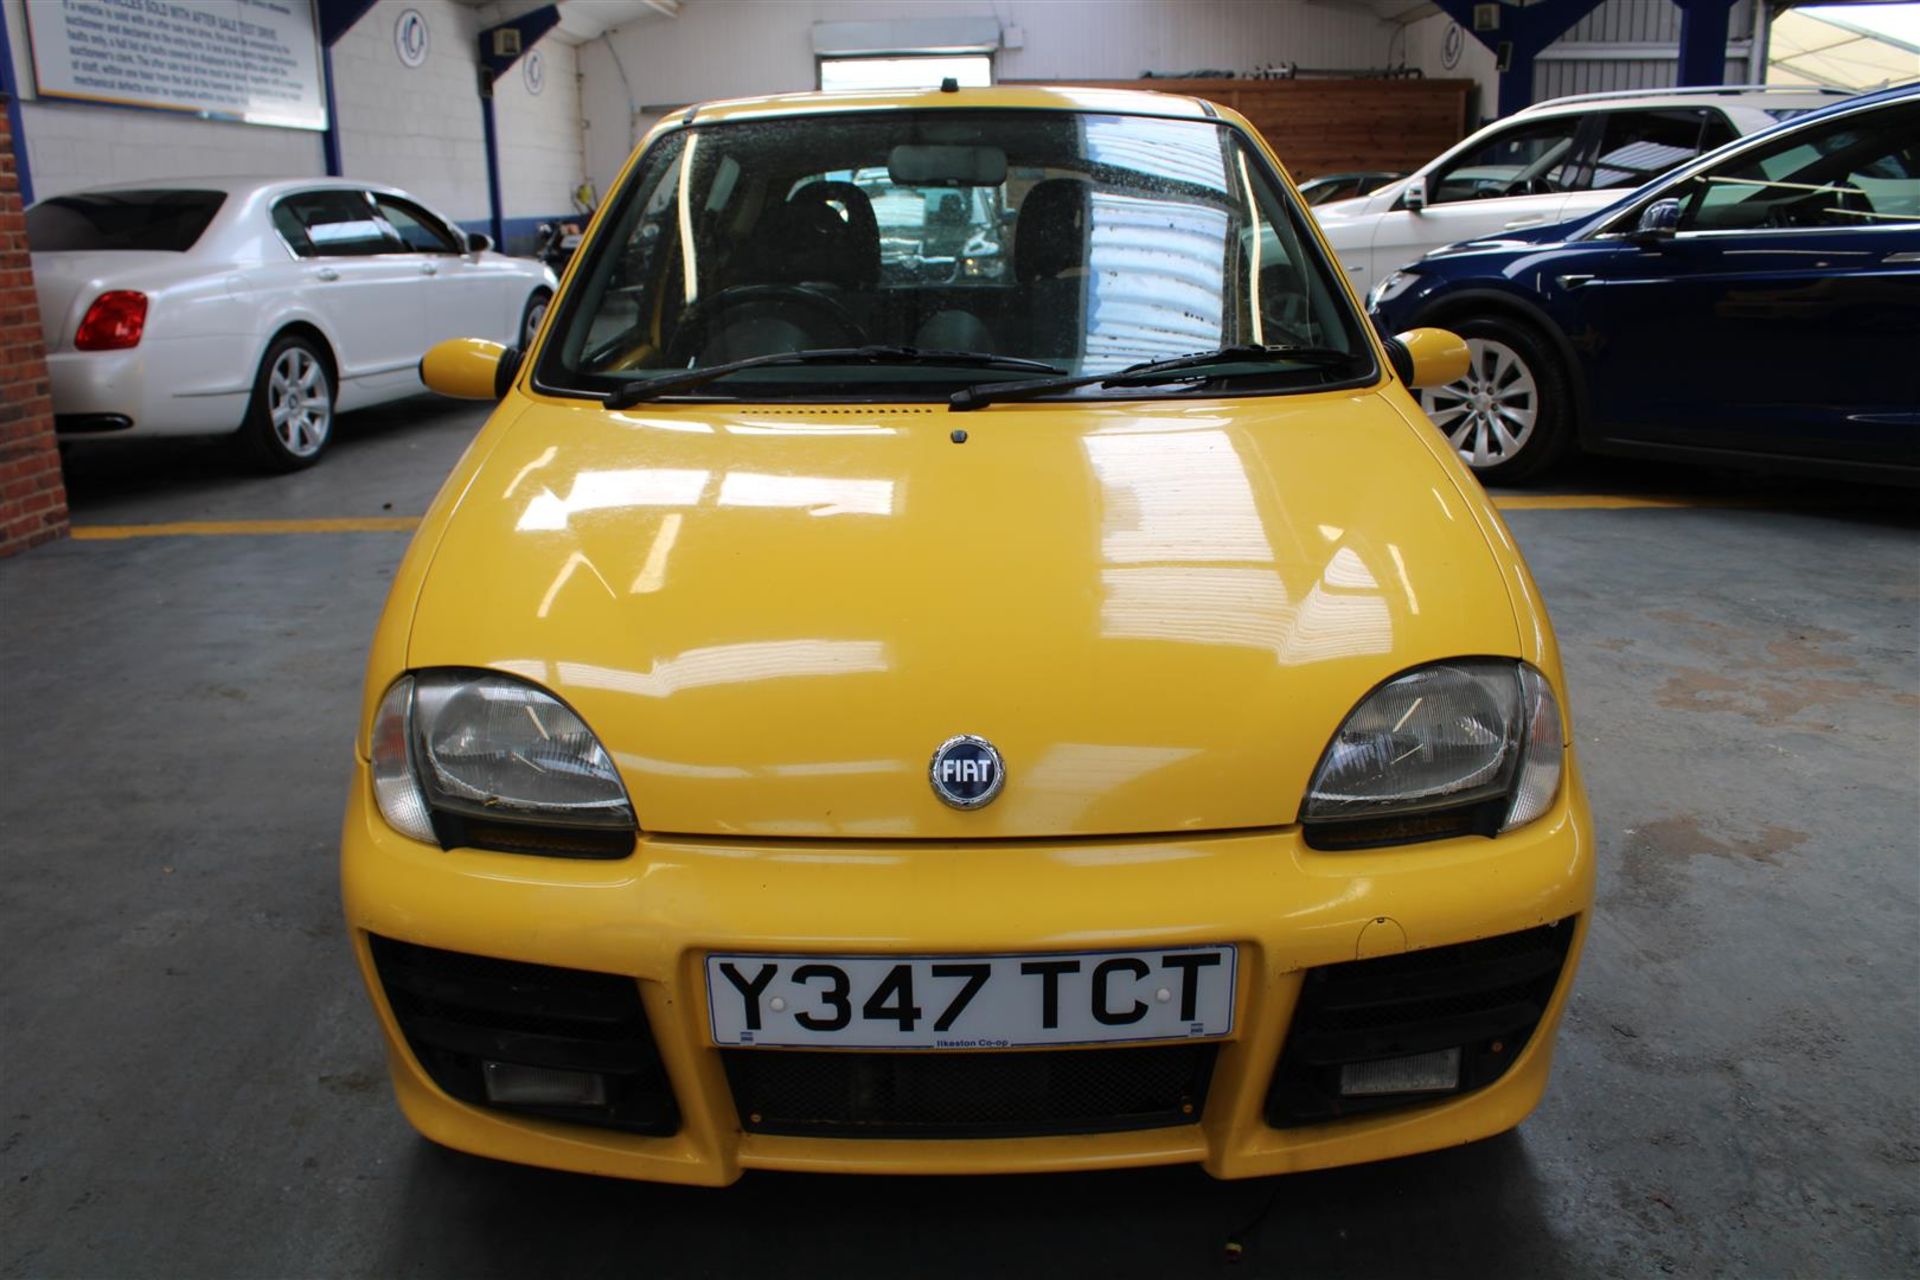 2001 Fiat Seicento Sporting - Image 2 of 23